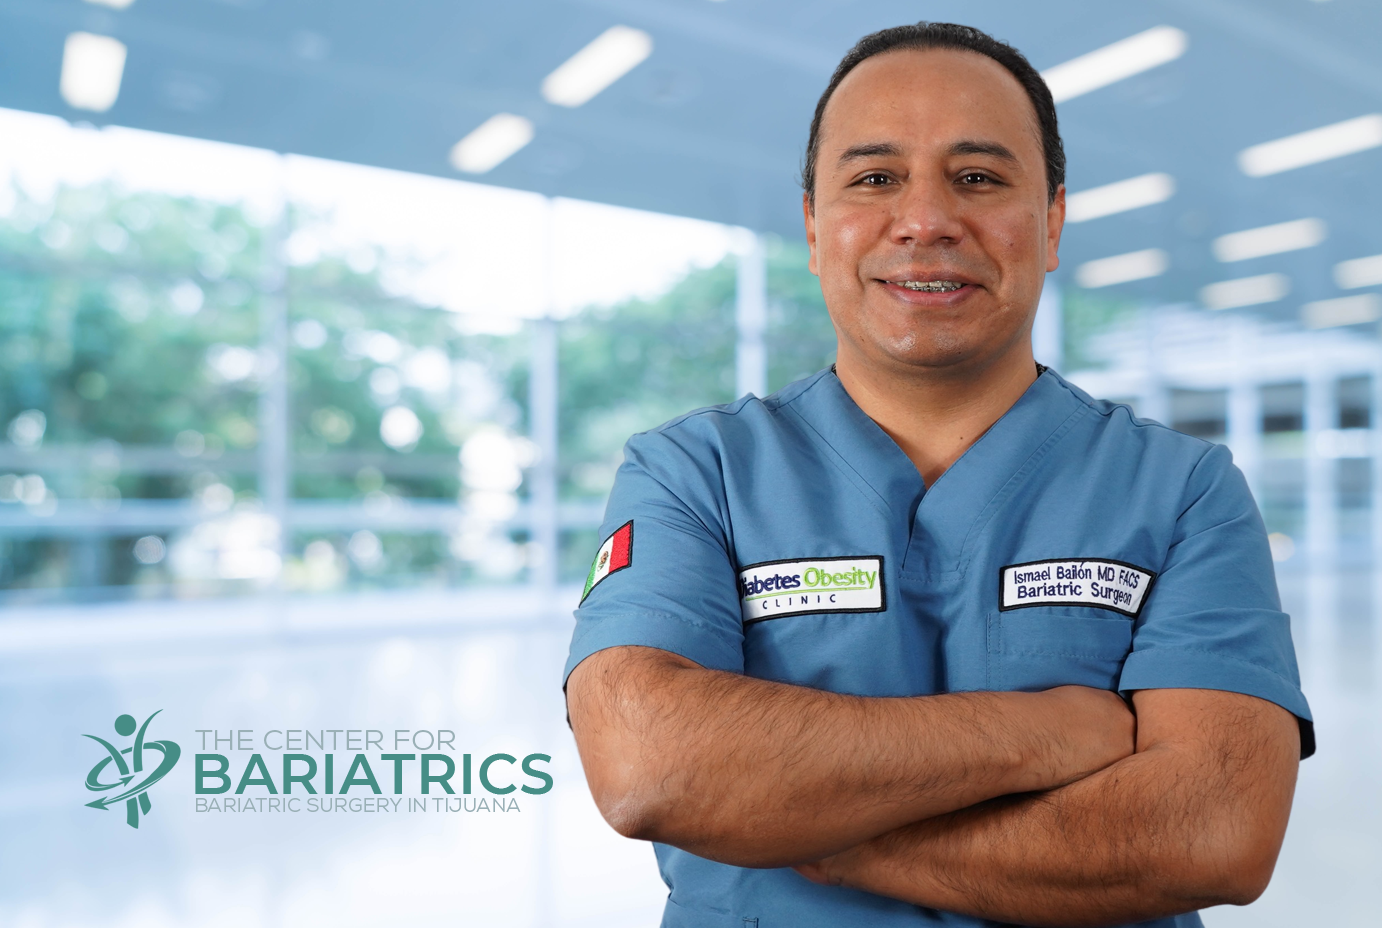 The Center for Bariatrics, in Tijuana, Mexico is the most comprehensive weight and metabolism management center offering laparoscopic and endoscopic bariatric surgery in Tijuana.